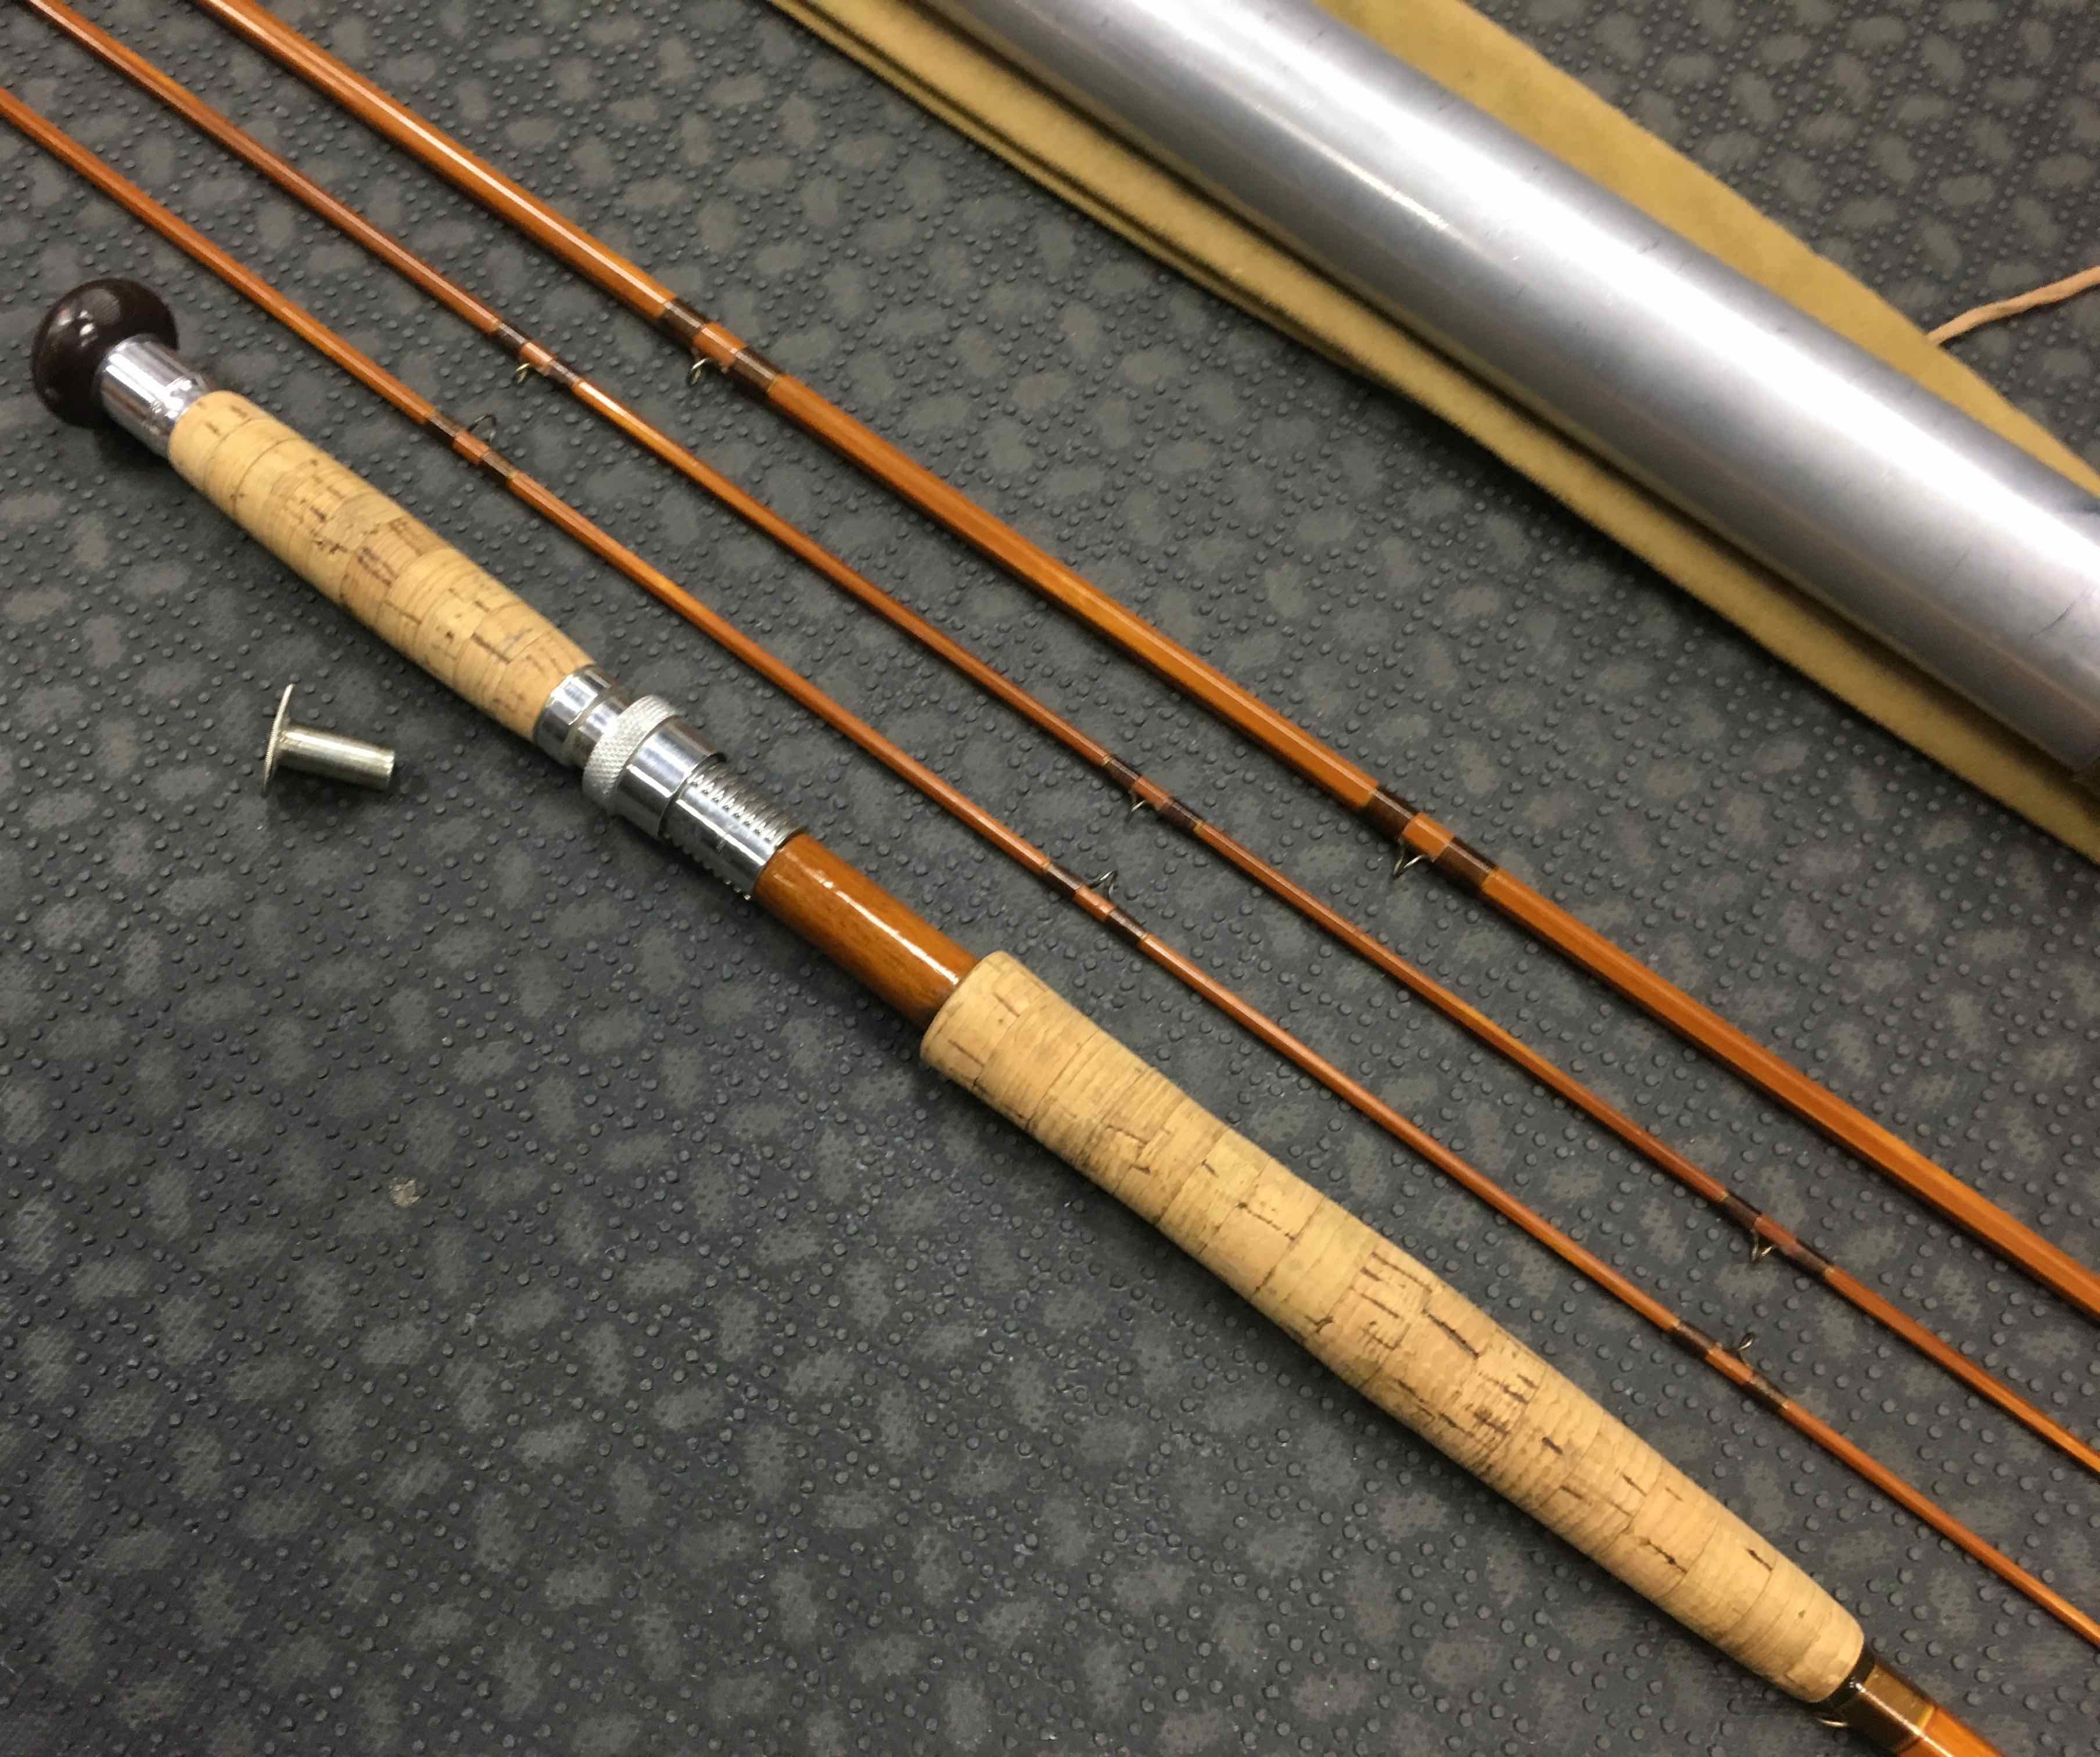 SOLD! – NEWER PRICE! – Vintage Payne – Made in USA – 3 pc Fly Rod